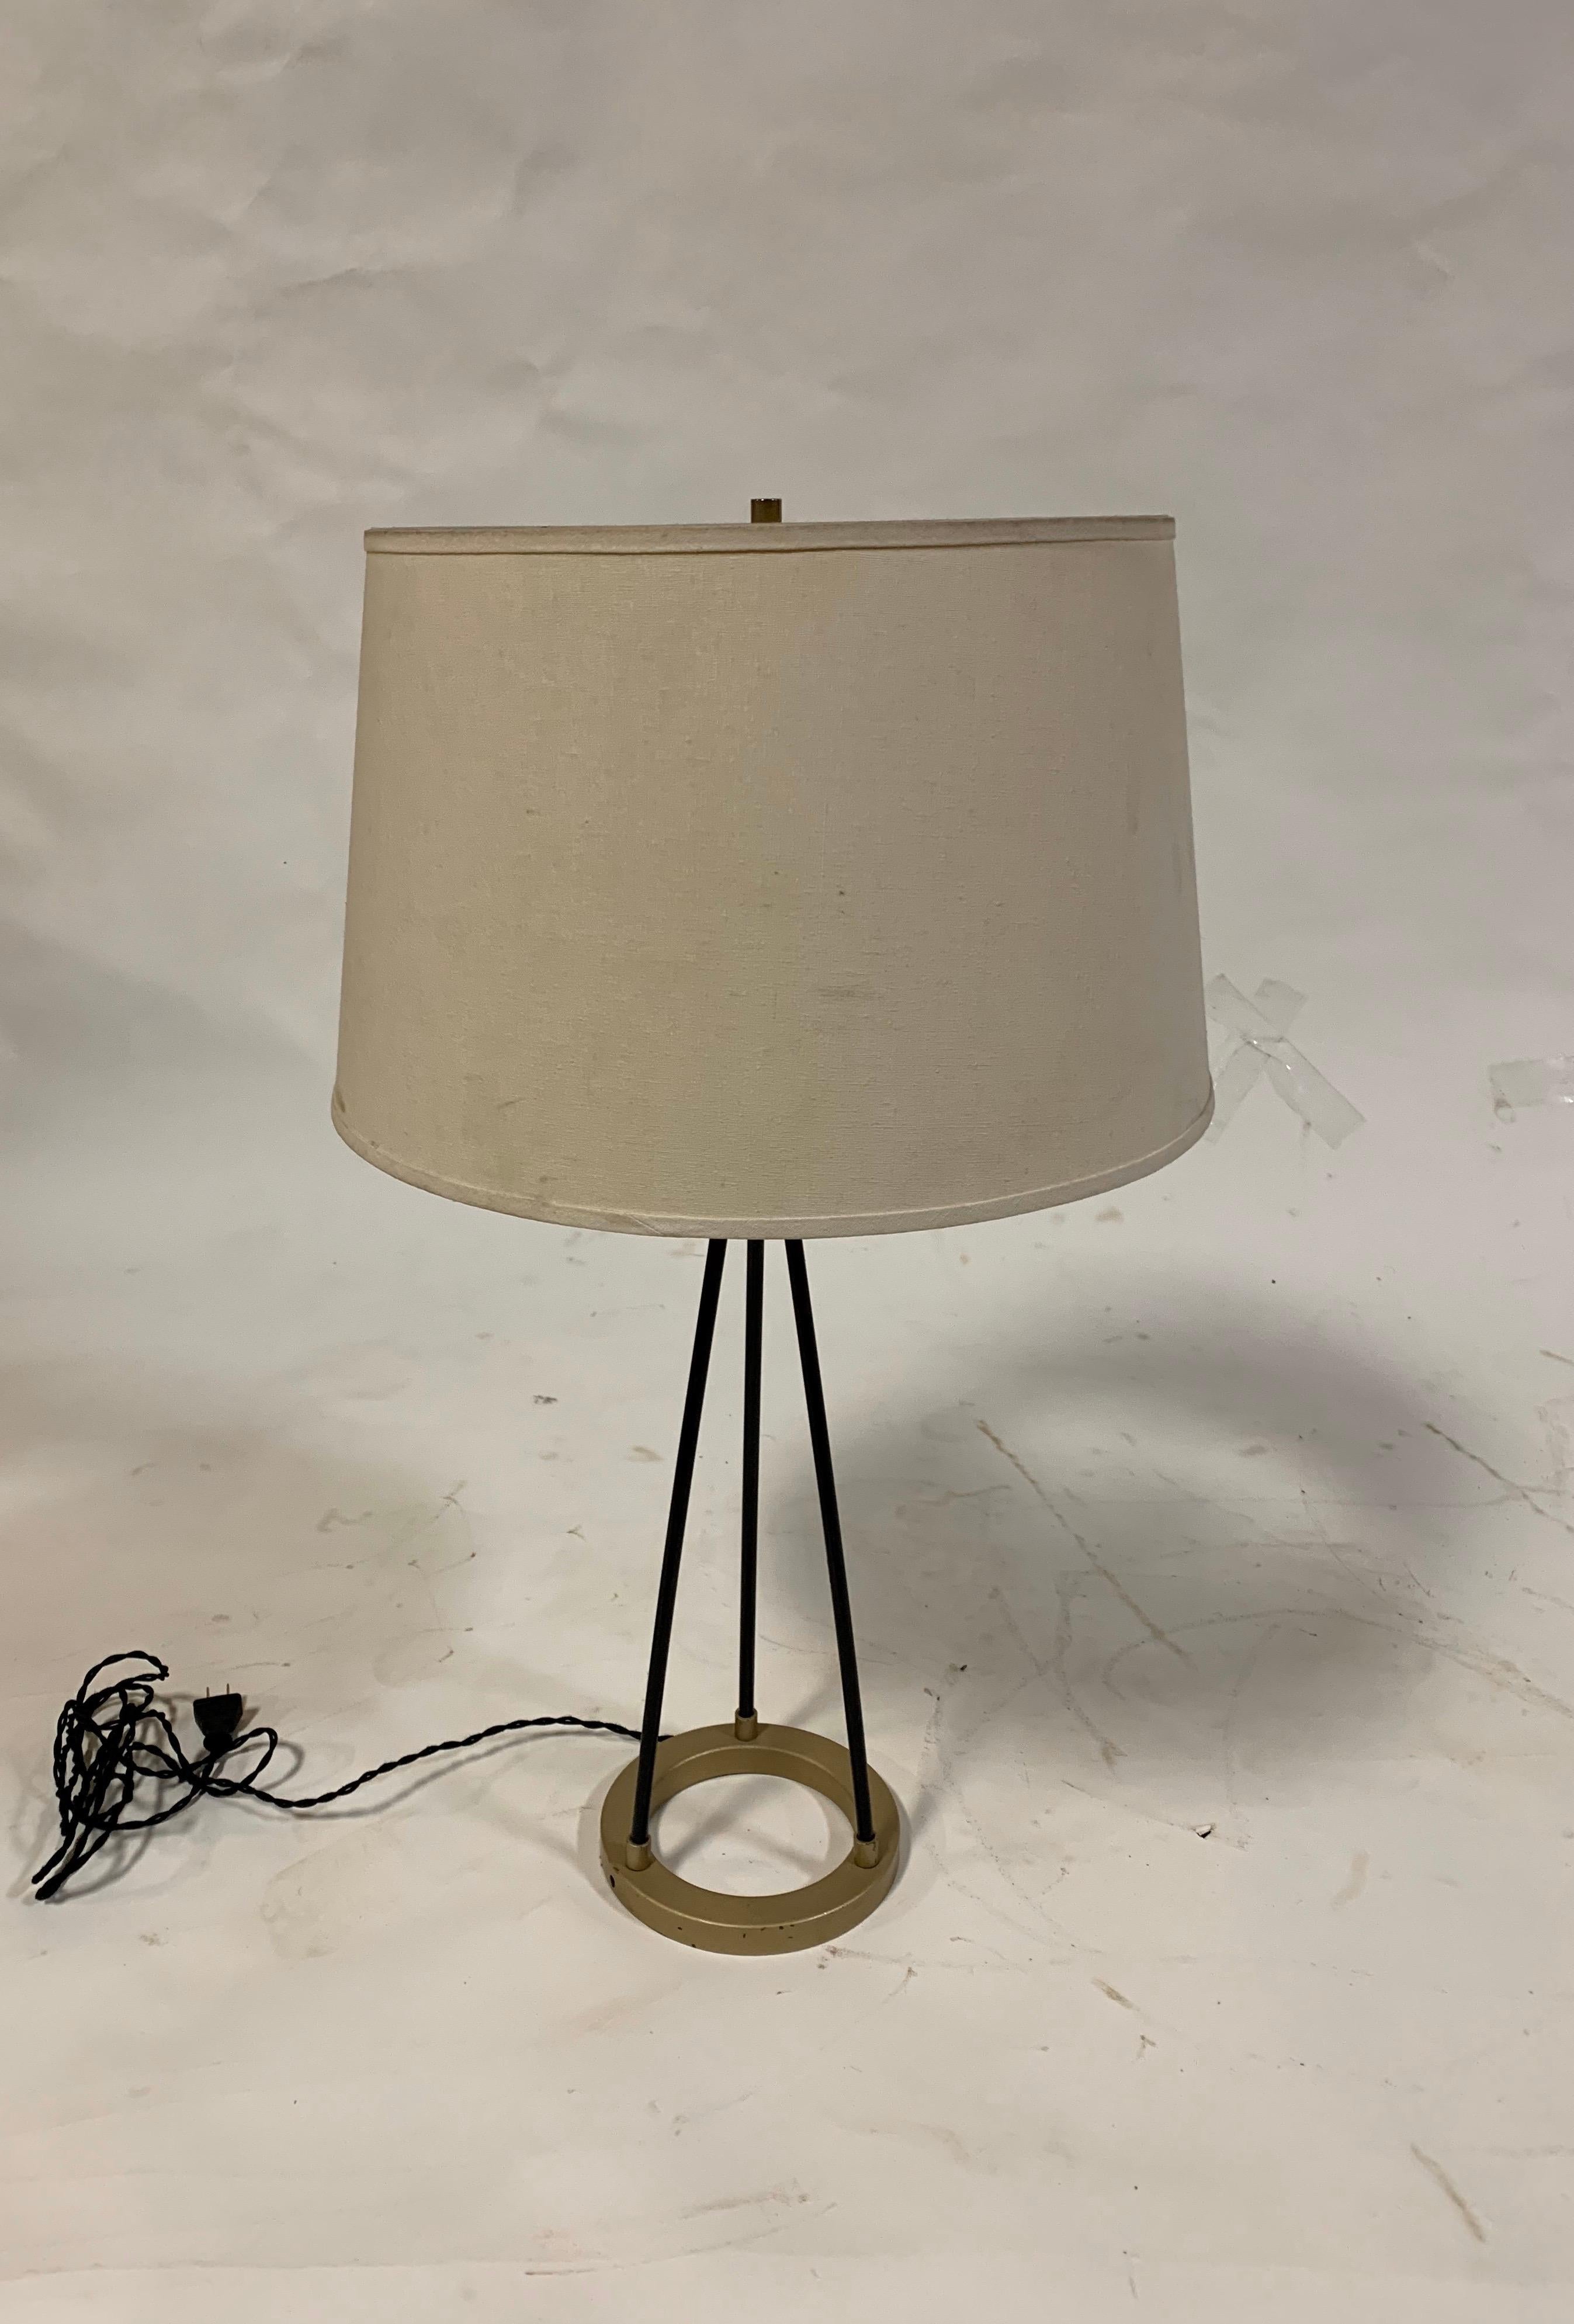 Walter Von Nessen style Machine Age Table Lamp In Good Condition For Sale In New York, NY